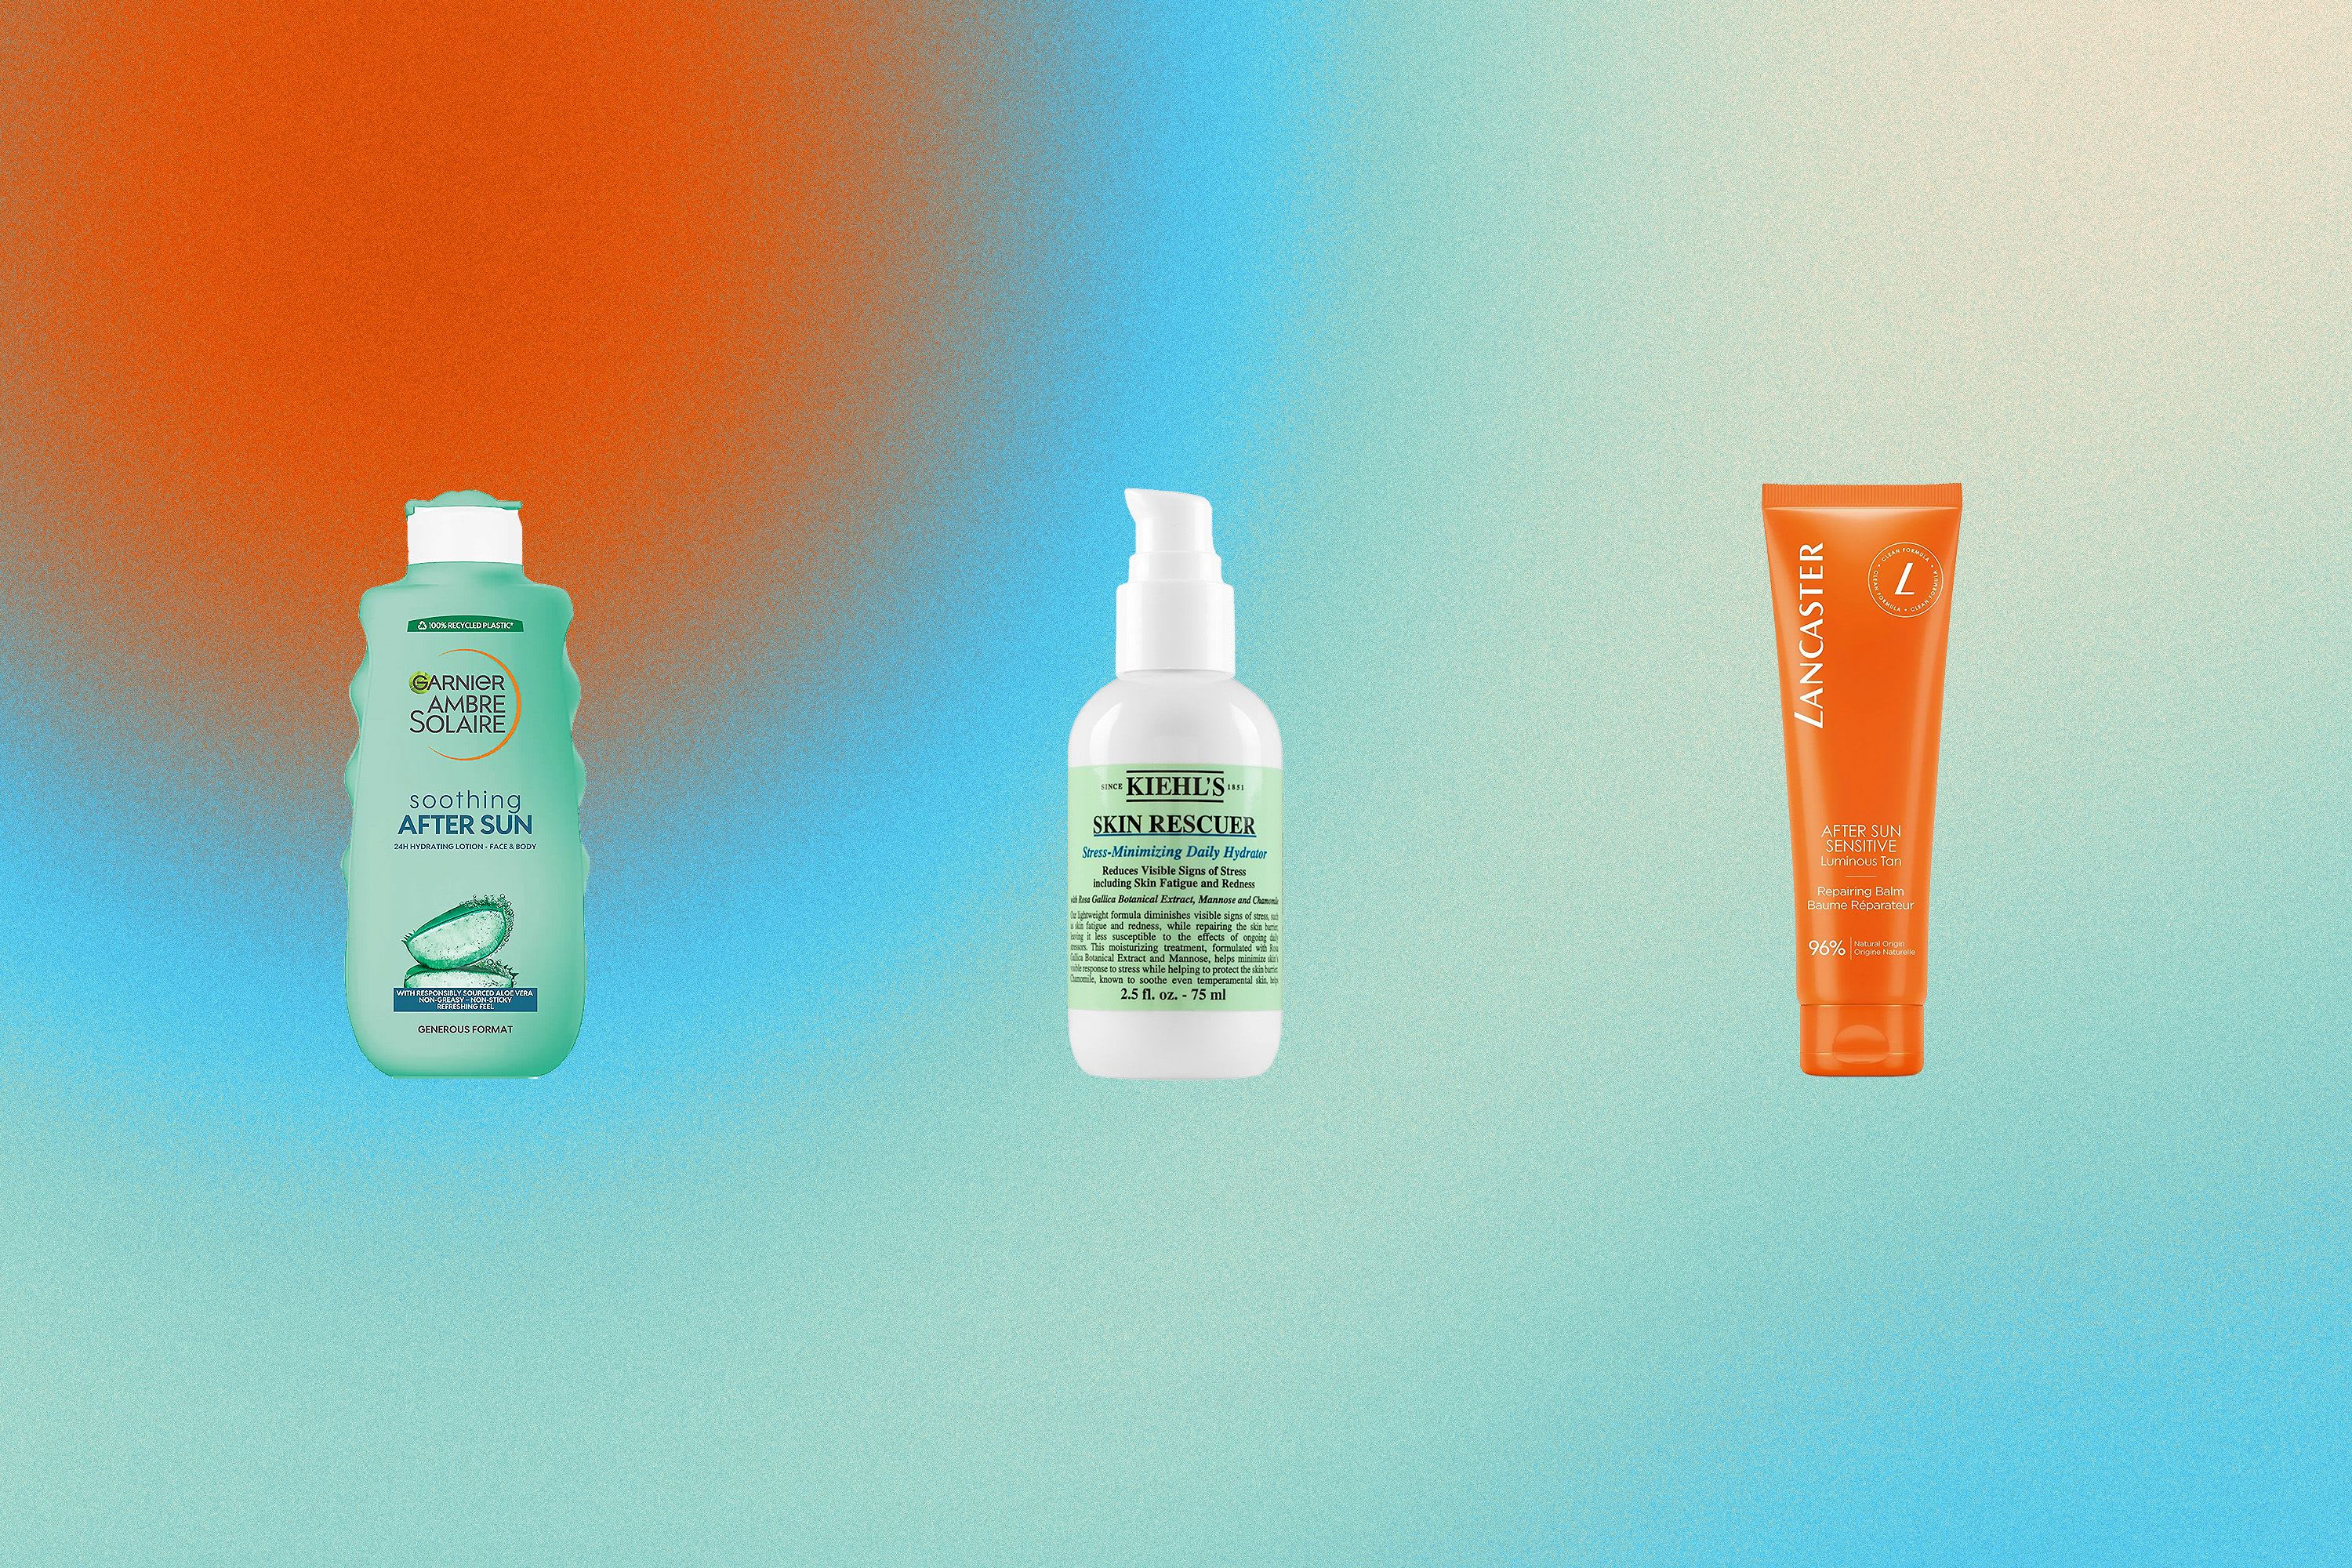 12 lotions, creams and balms for sunburn and after sun care